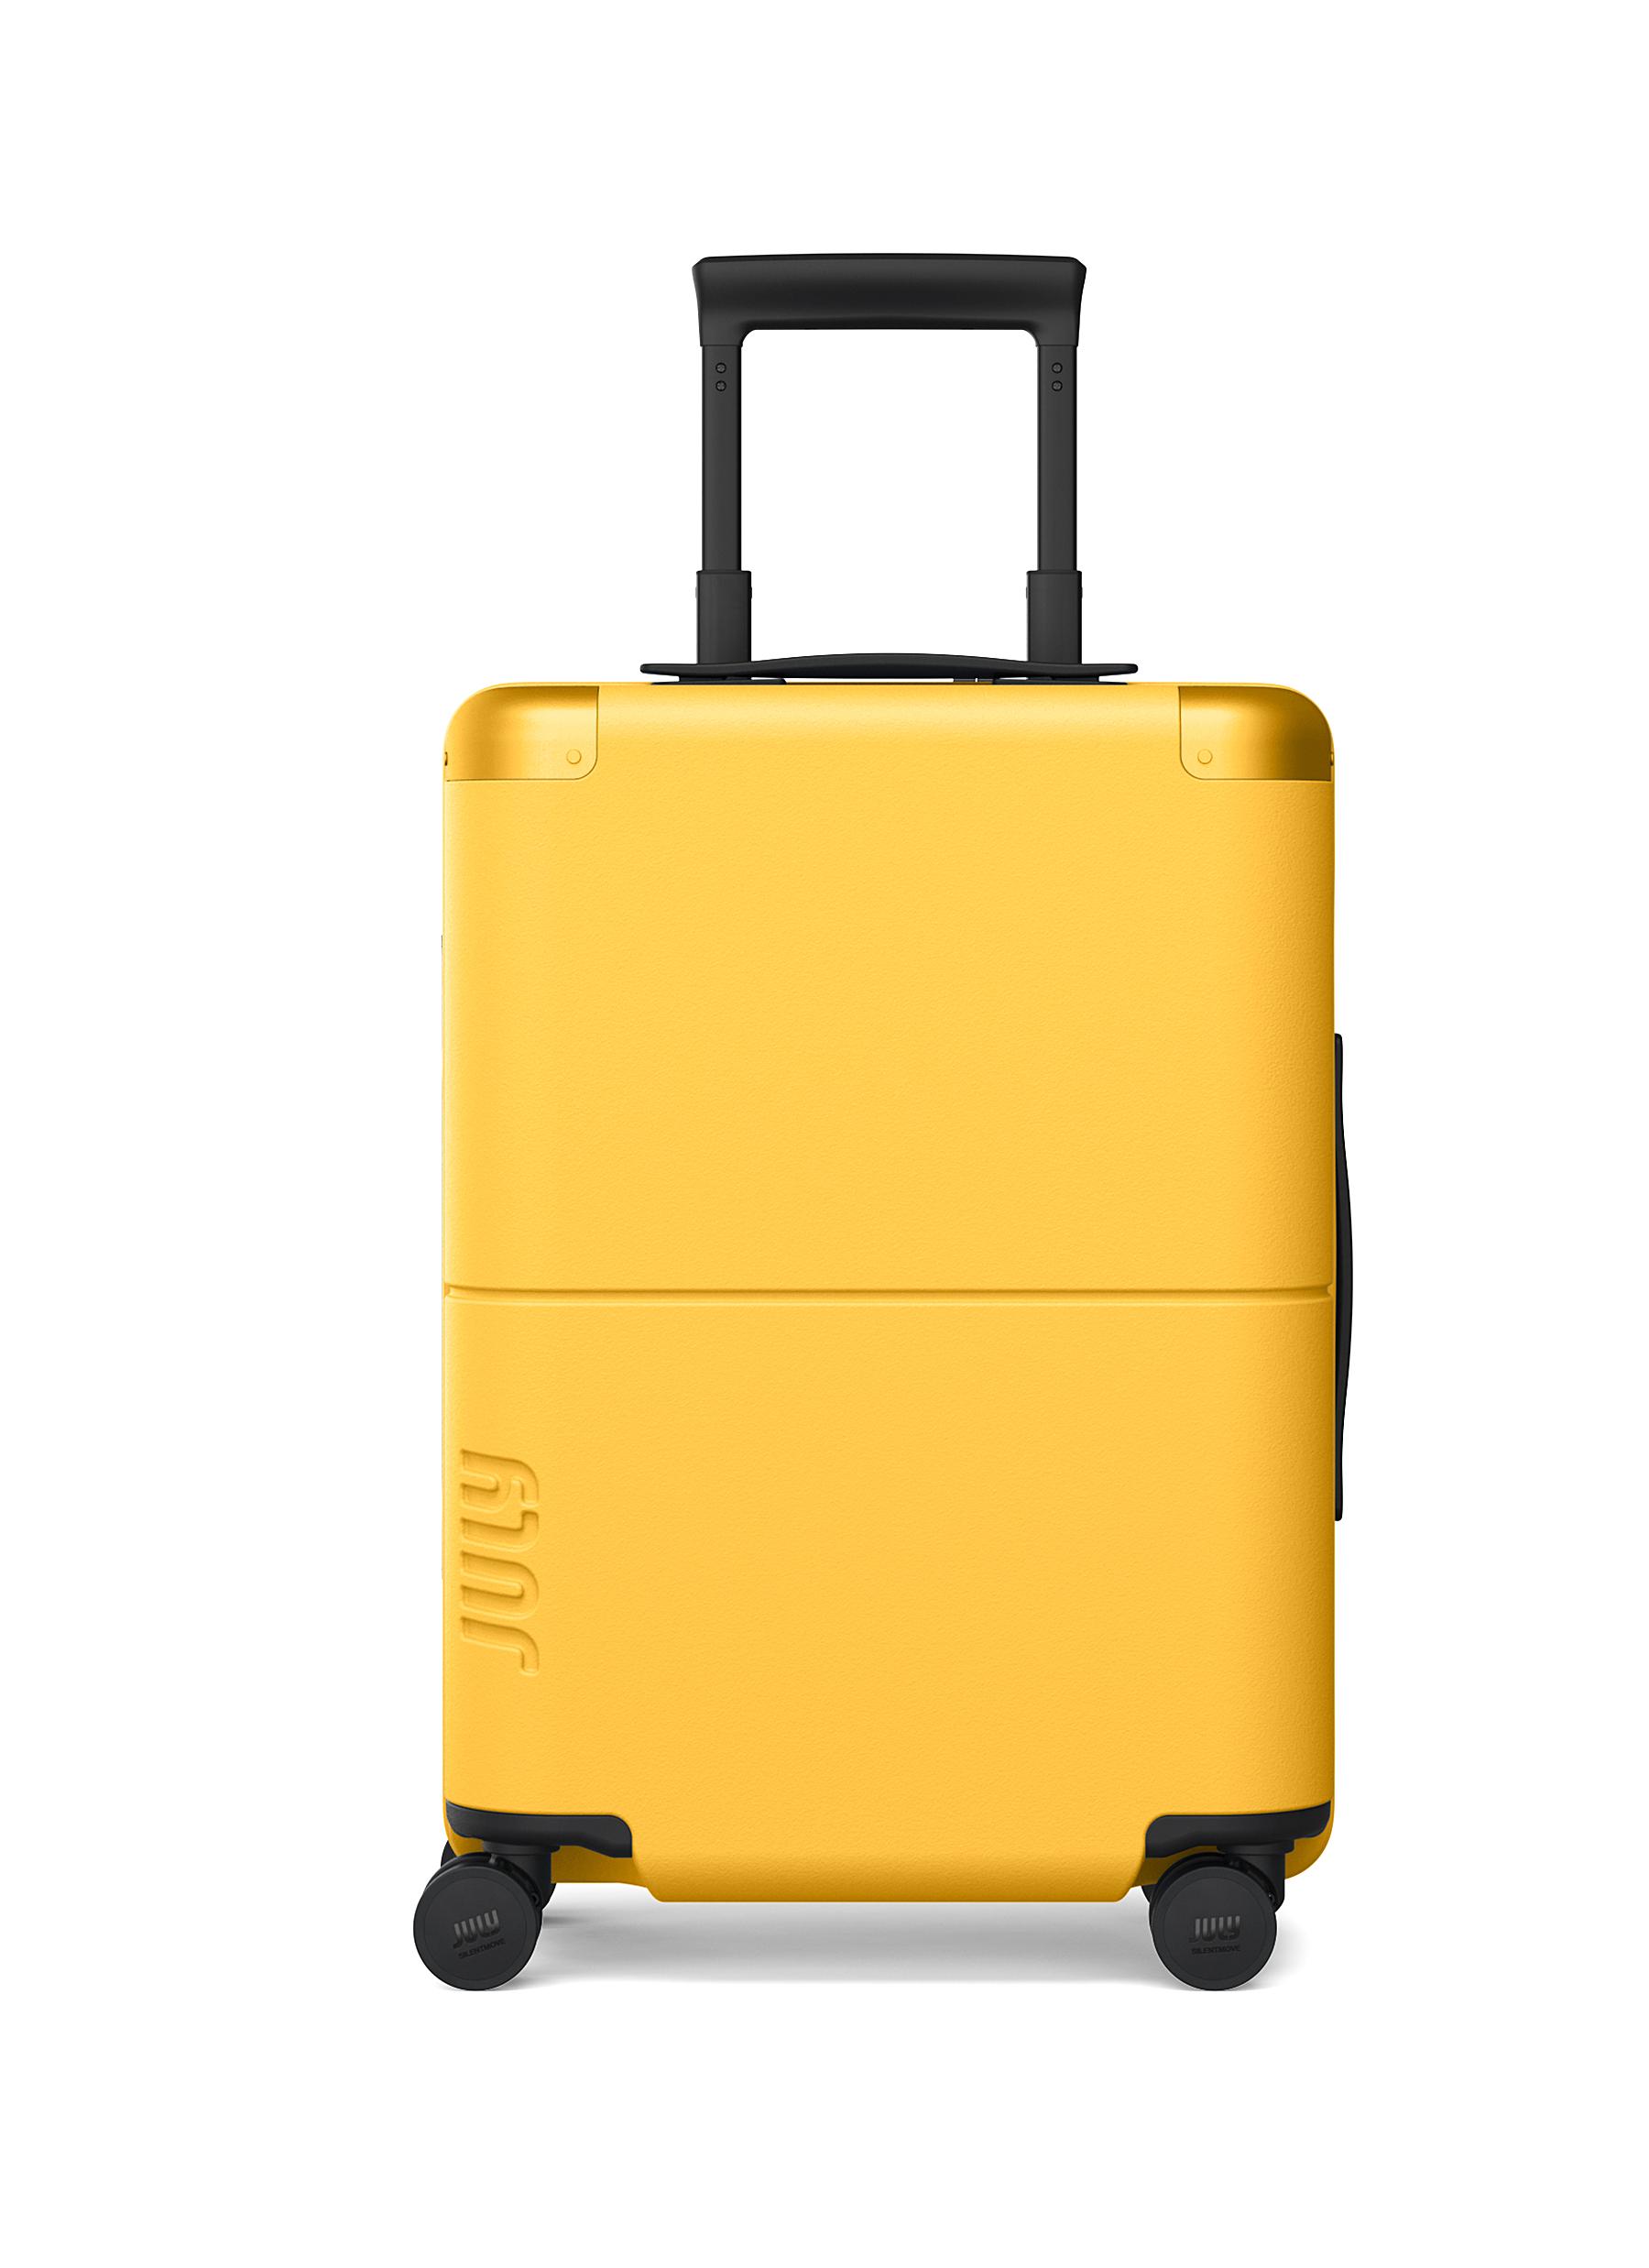 Carry On Suitcase - Marigold Yellow